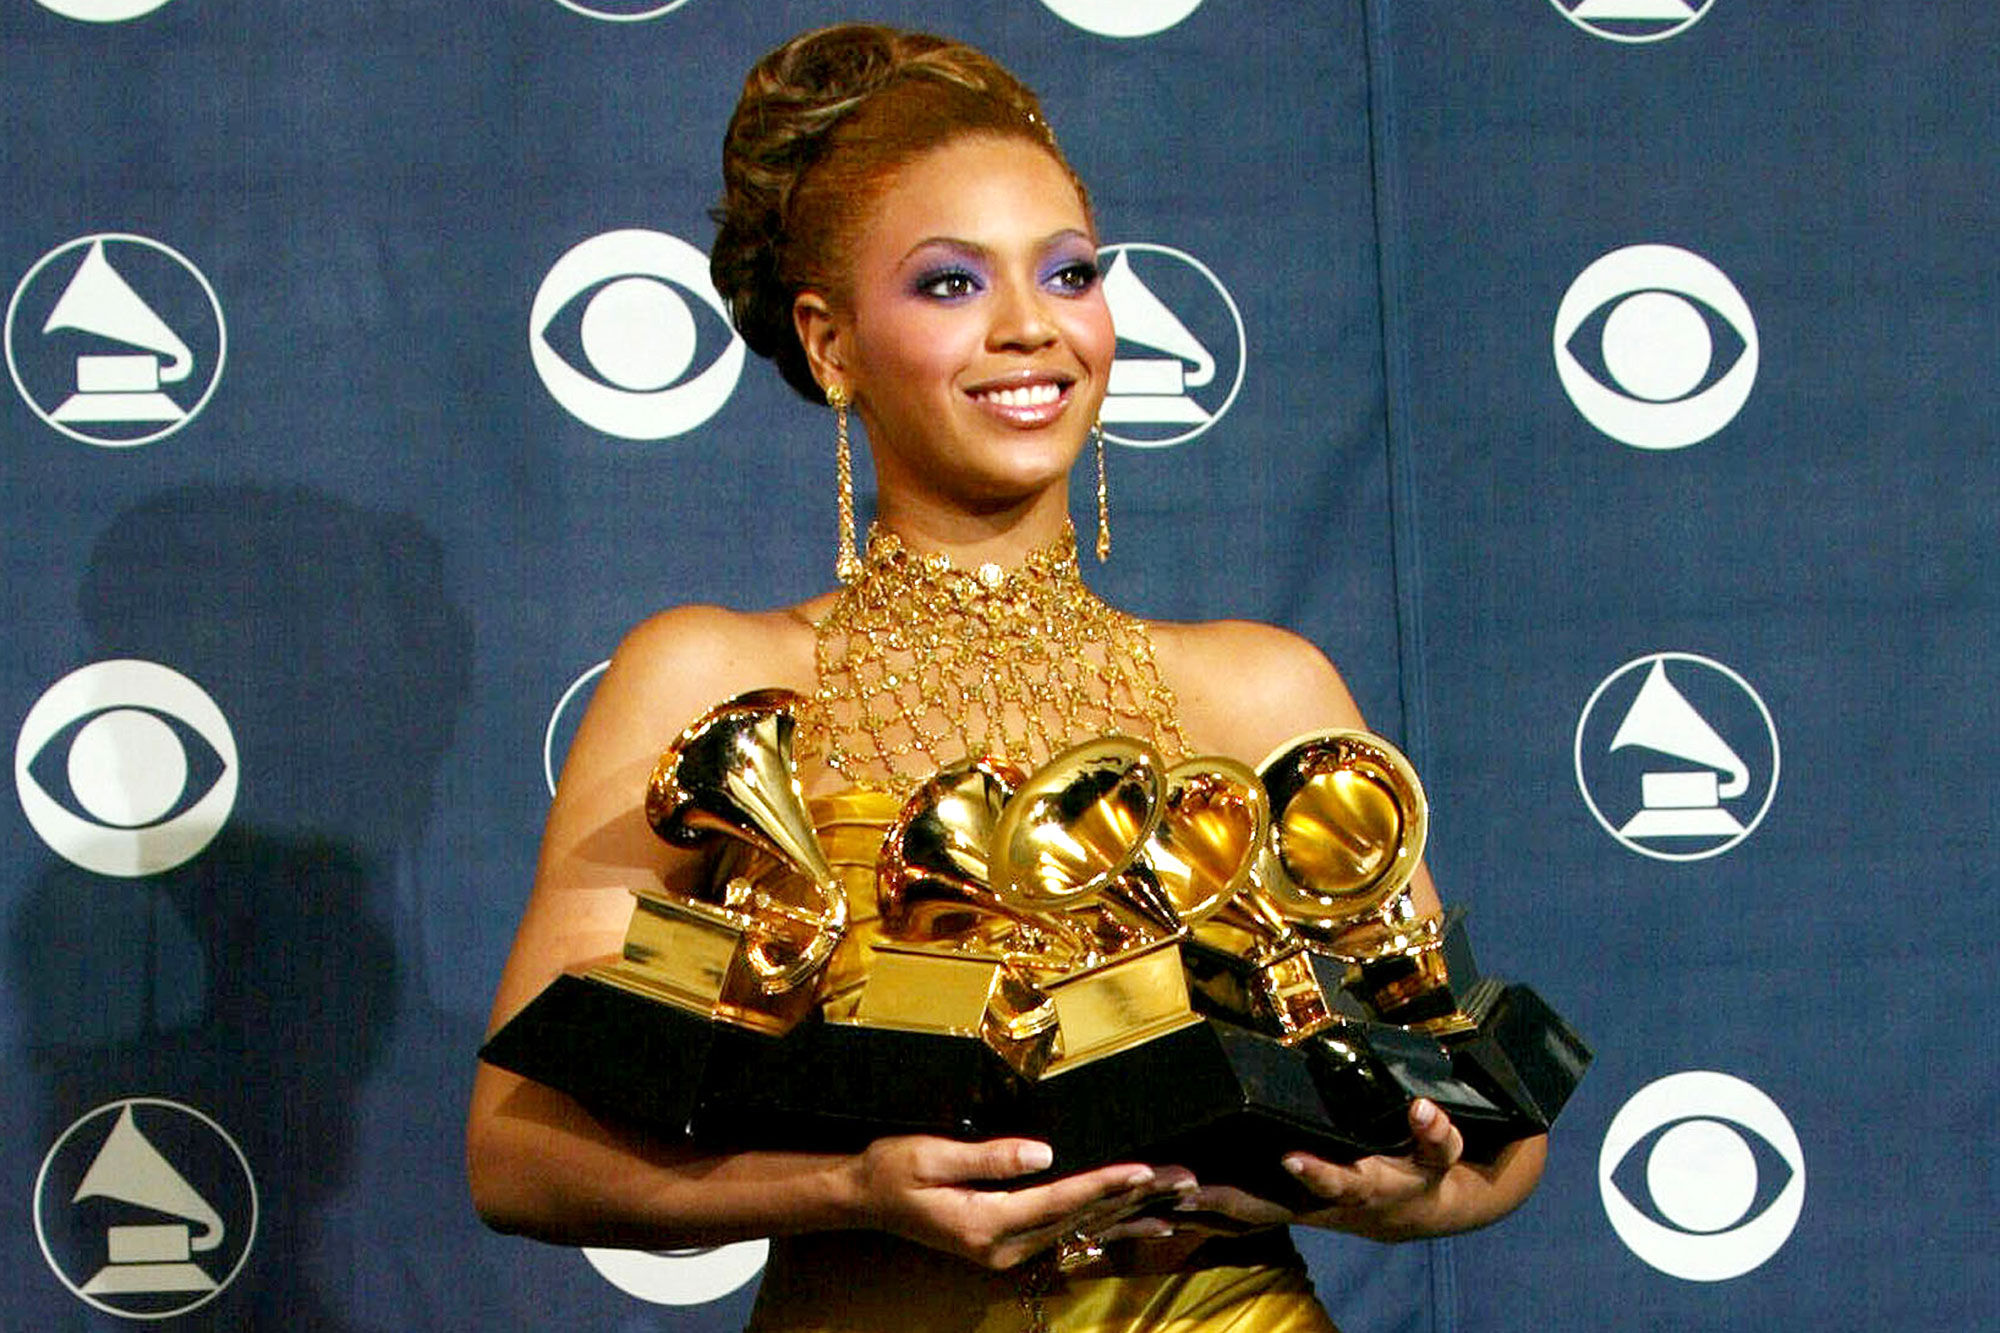 records held by Beyoncé's